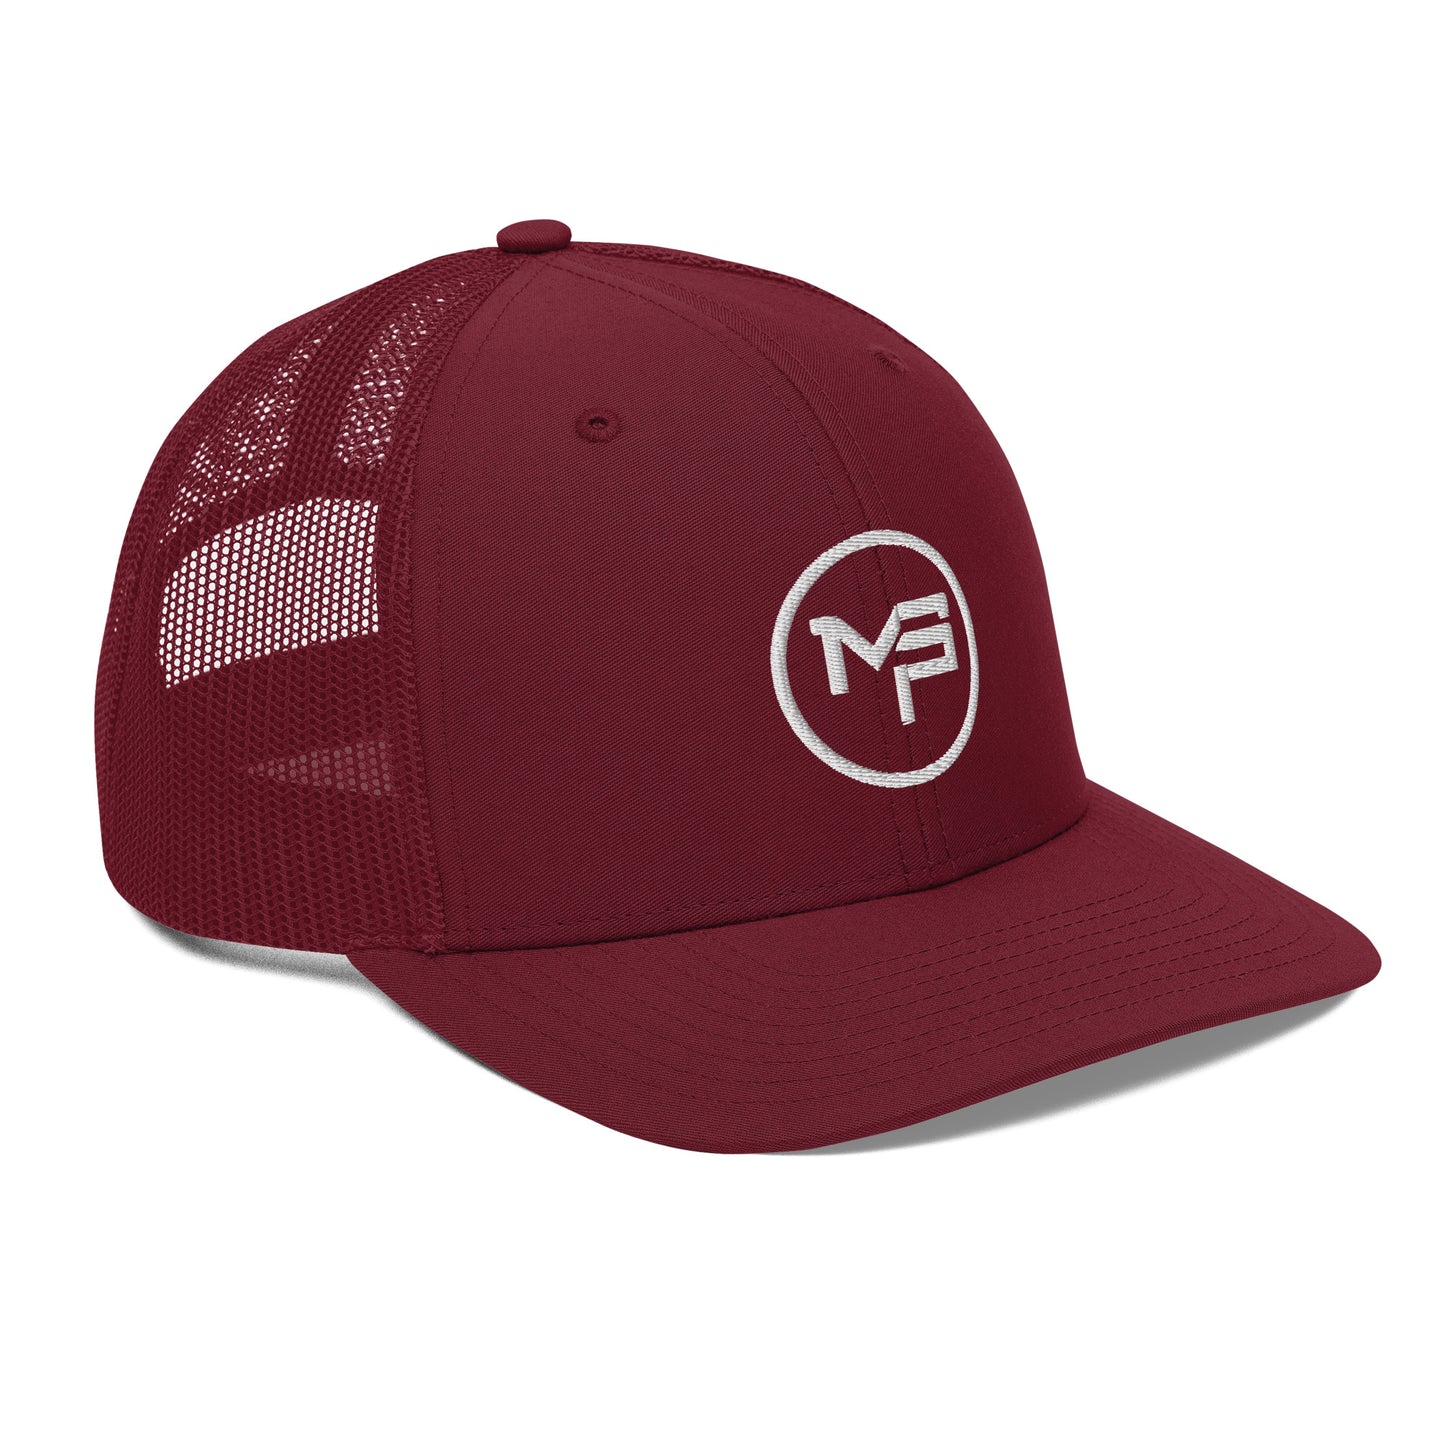 THE MINDSTRONG PROJECT LOGO TRUCKER HAT (MORE COLORS)